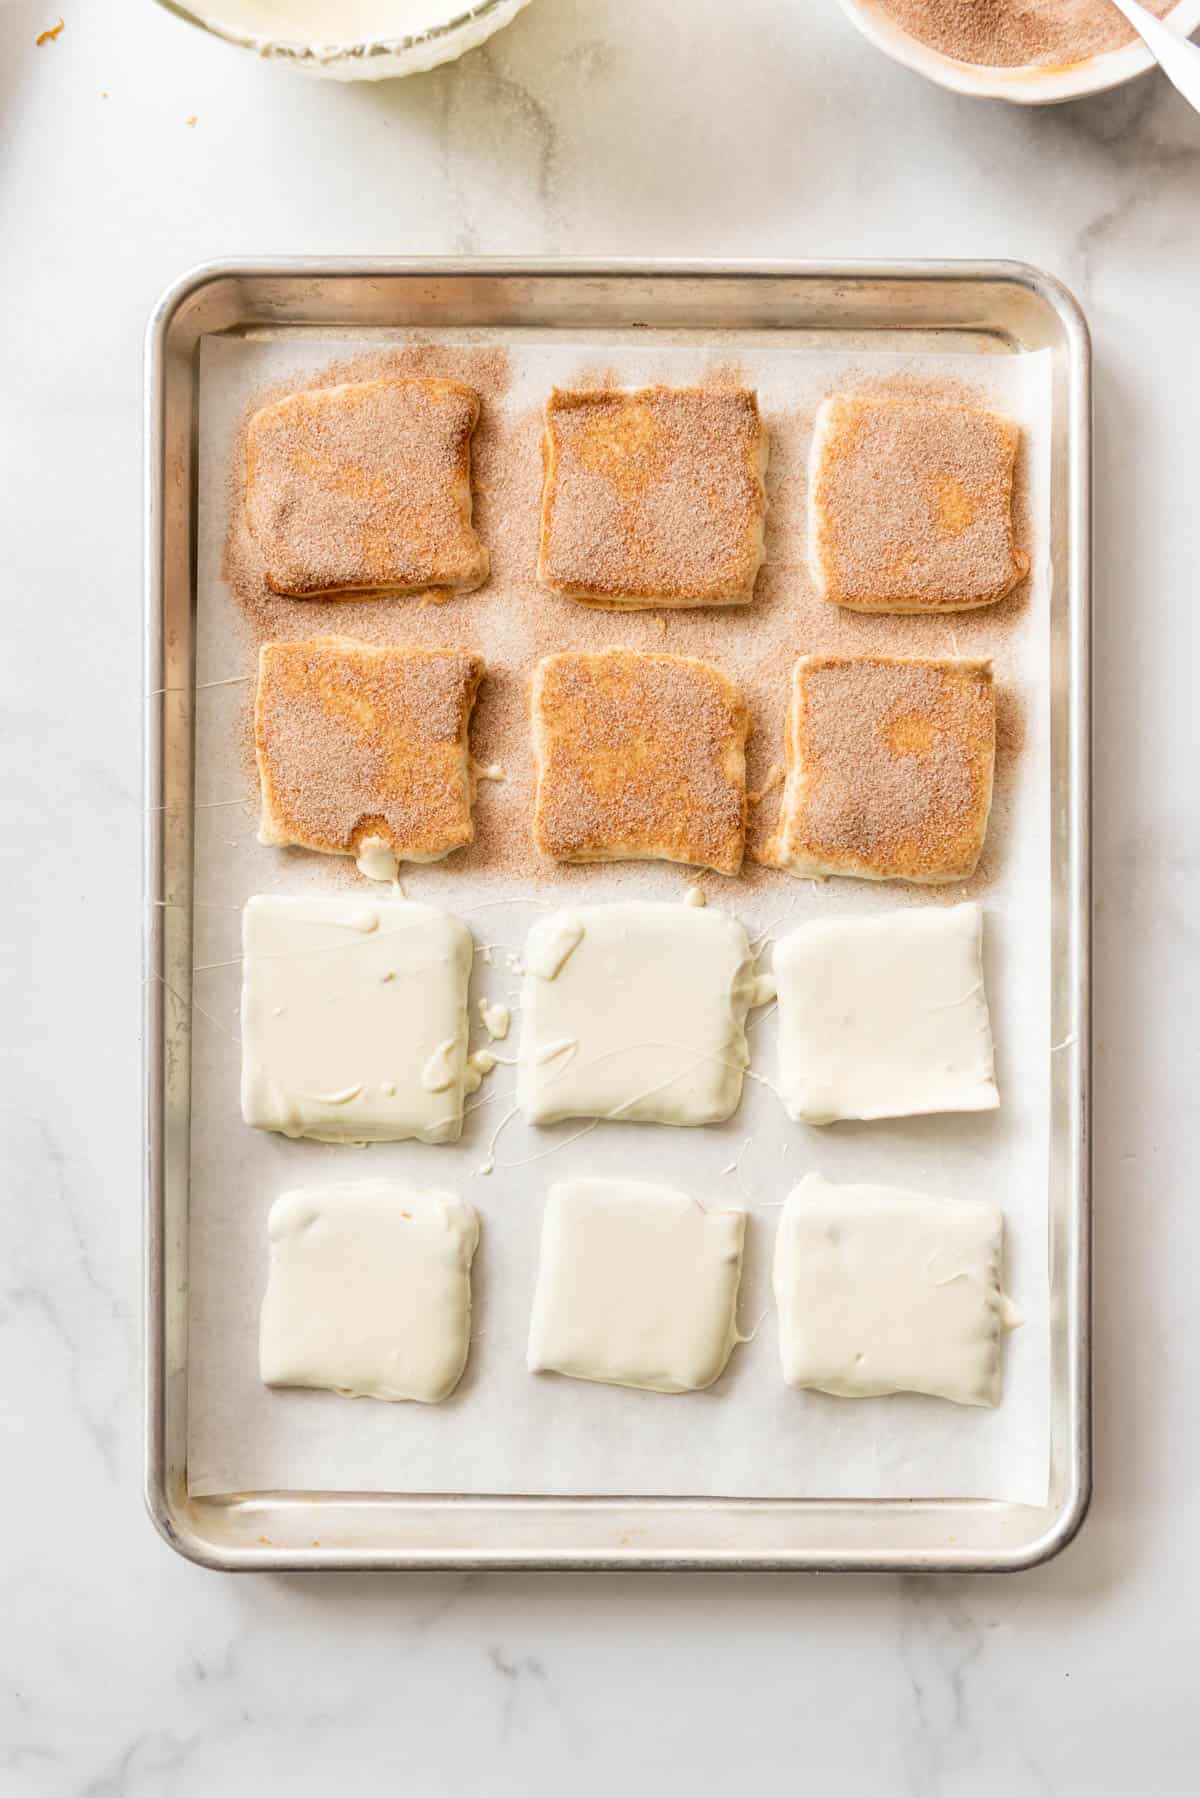 An image of Toffee squares dipped in white chocolate and then getting sprinkled with a cinnamon sugar mixture.